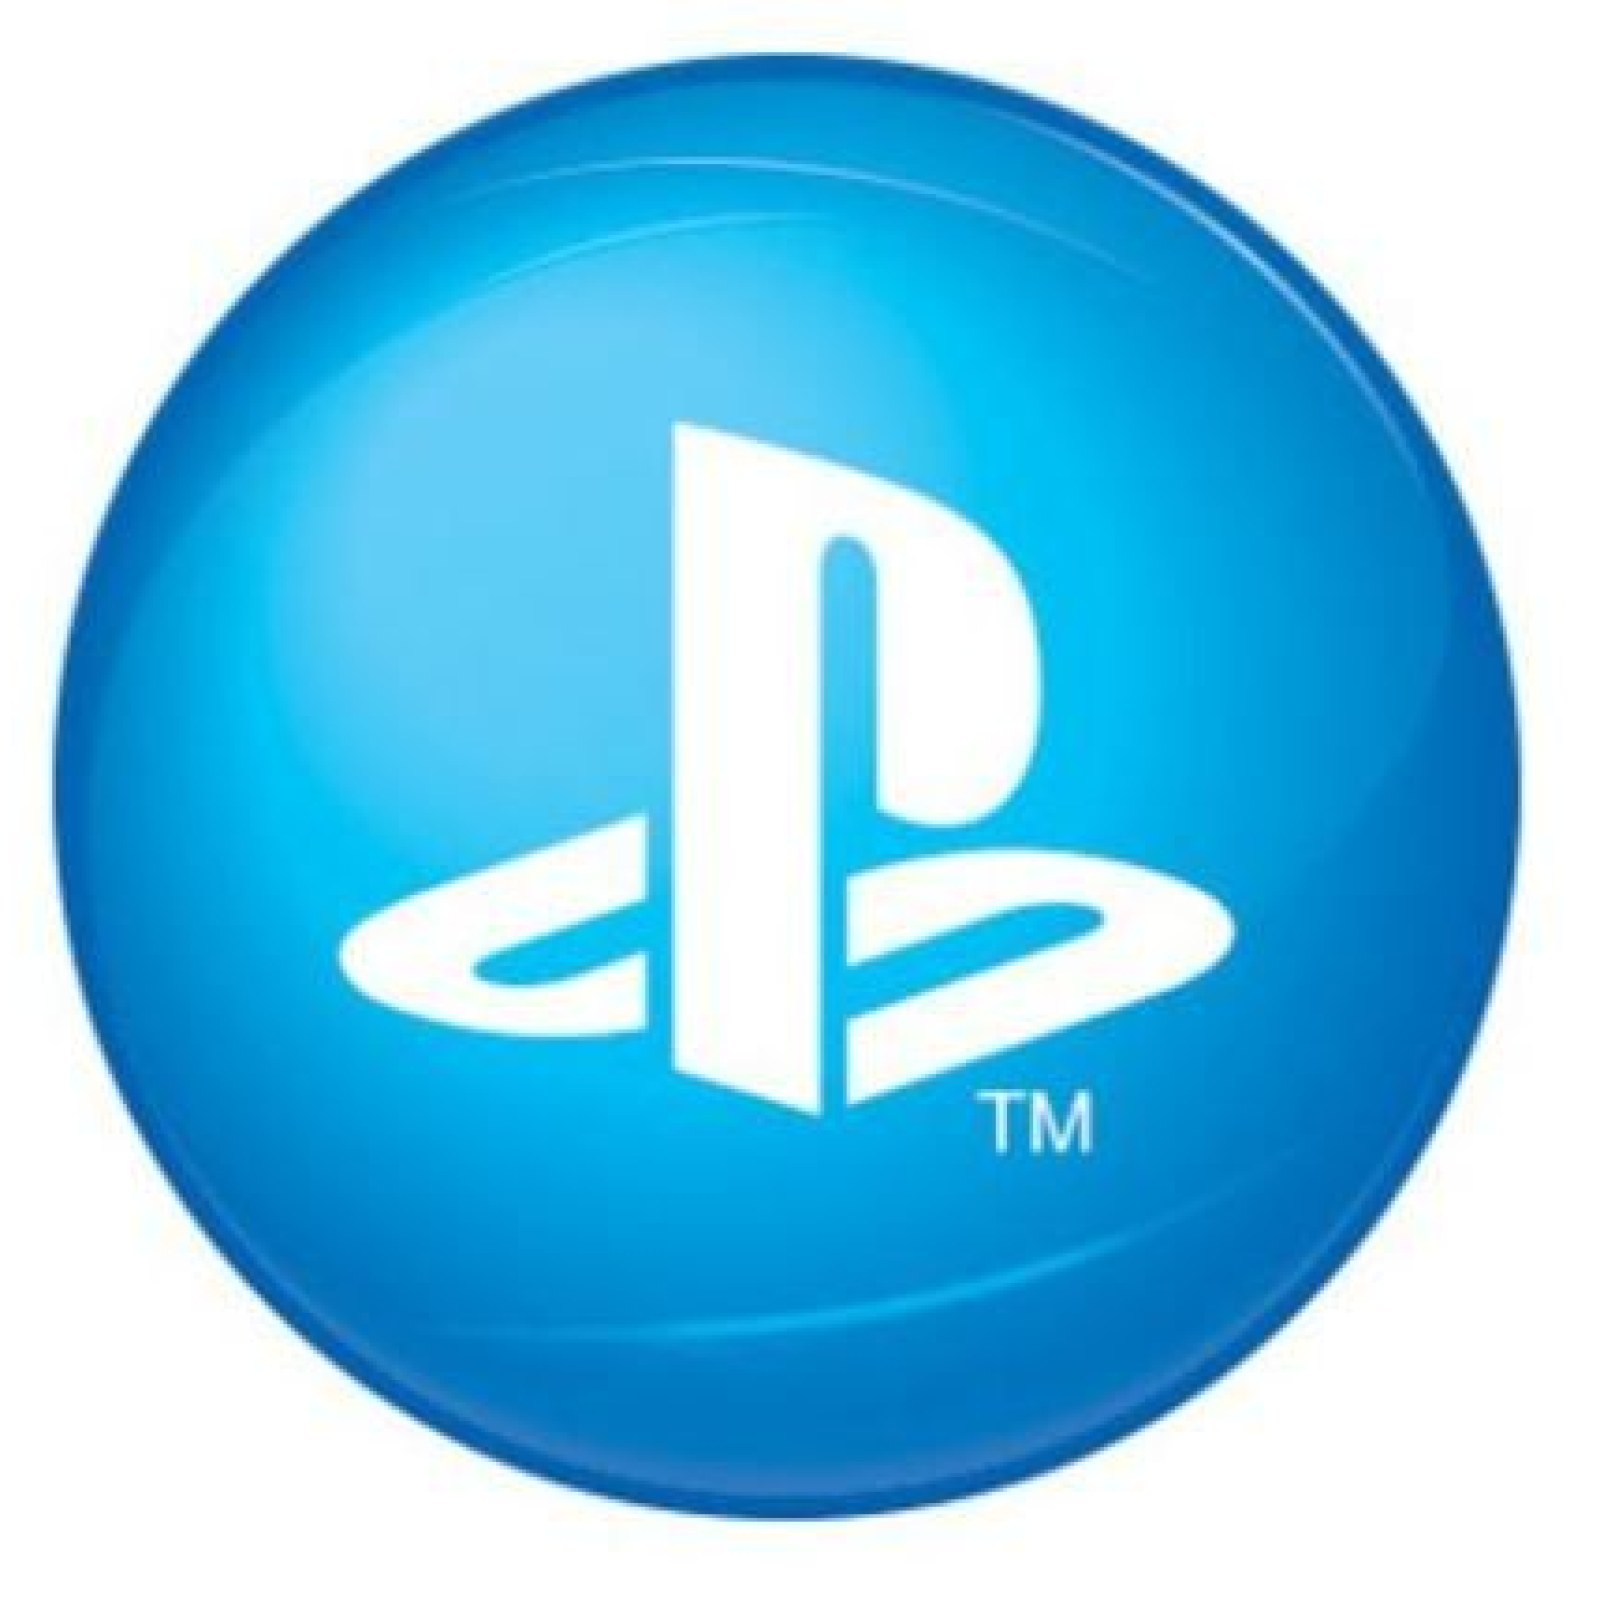 PlayStation Network Down, Not Working? PSN Users Unable Join Games, Access Store